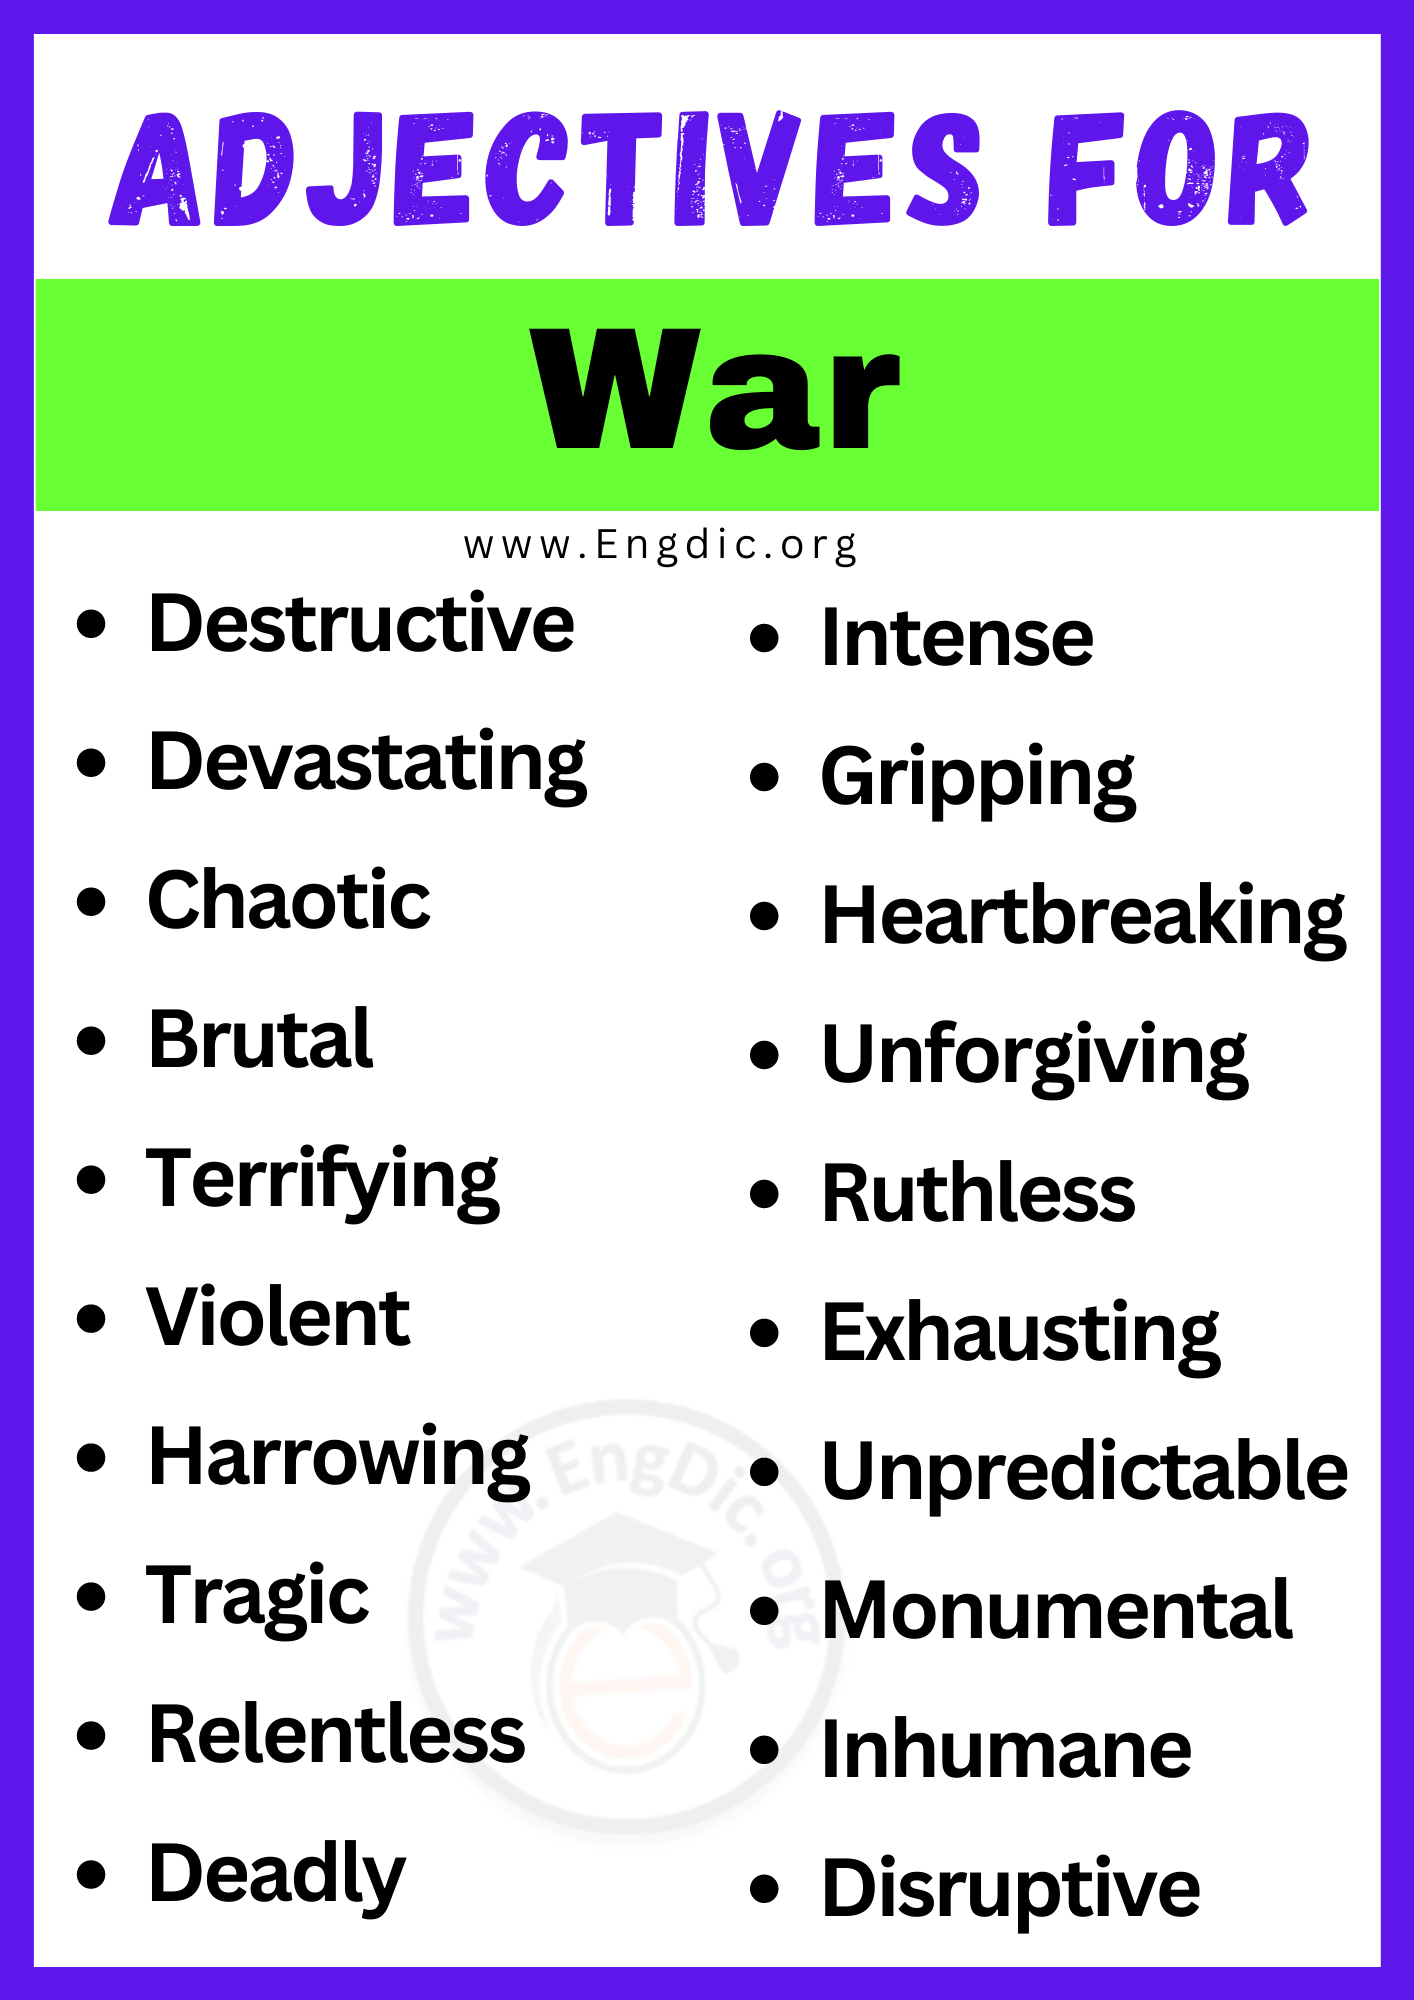 Adjectives for War